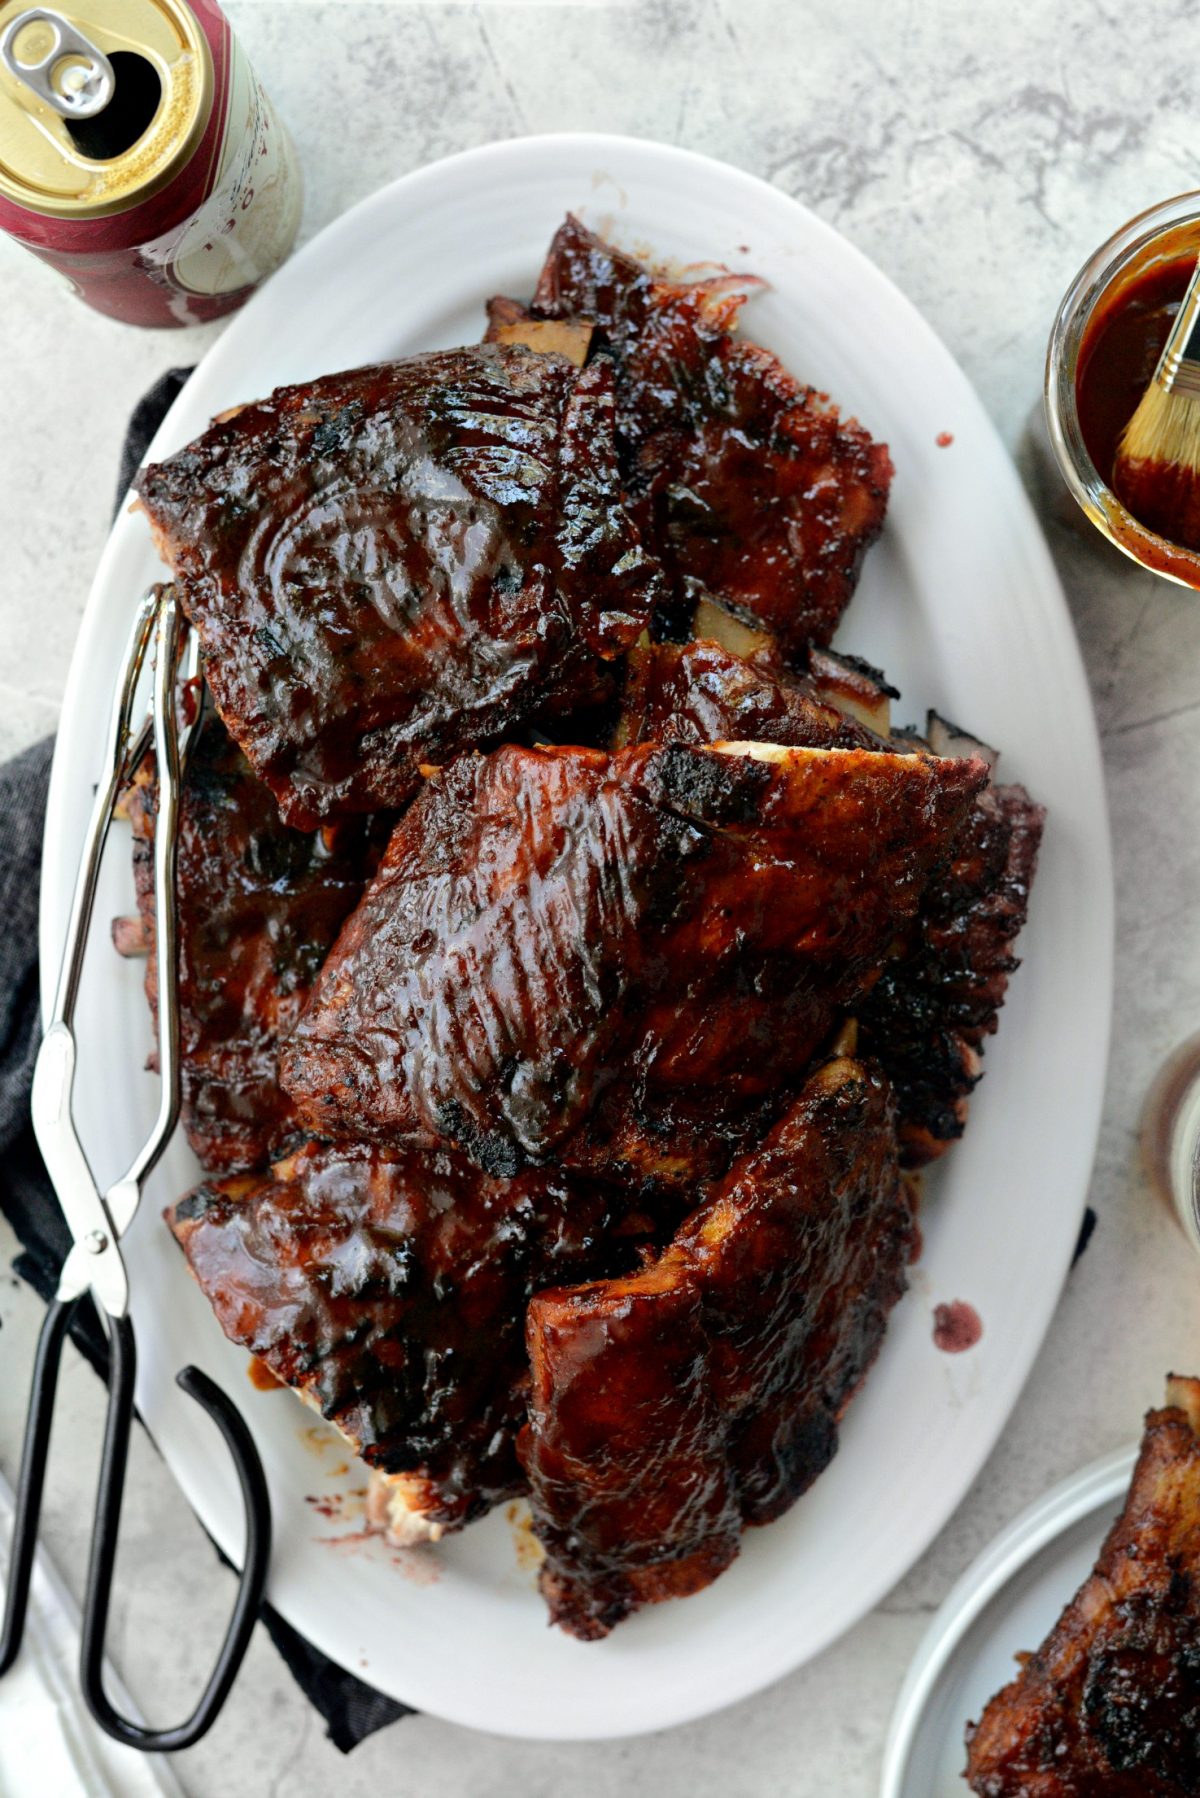 Easy BBQ Baby Back Ribs l SimplyScratch.com #easyrecipe #griling #BBQ #babybackribs #ribs #ovenbaked #grilled #homemade #sauce 